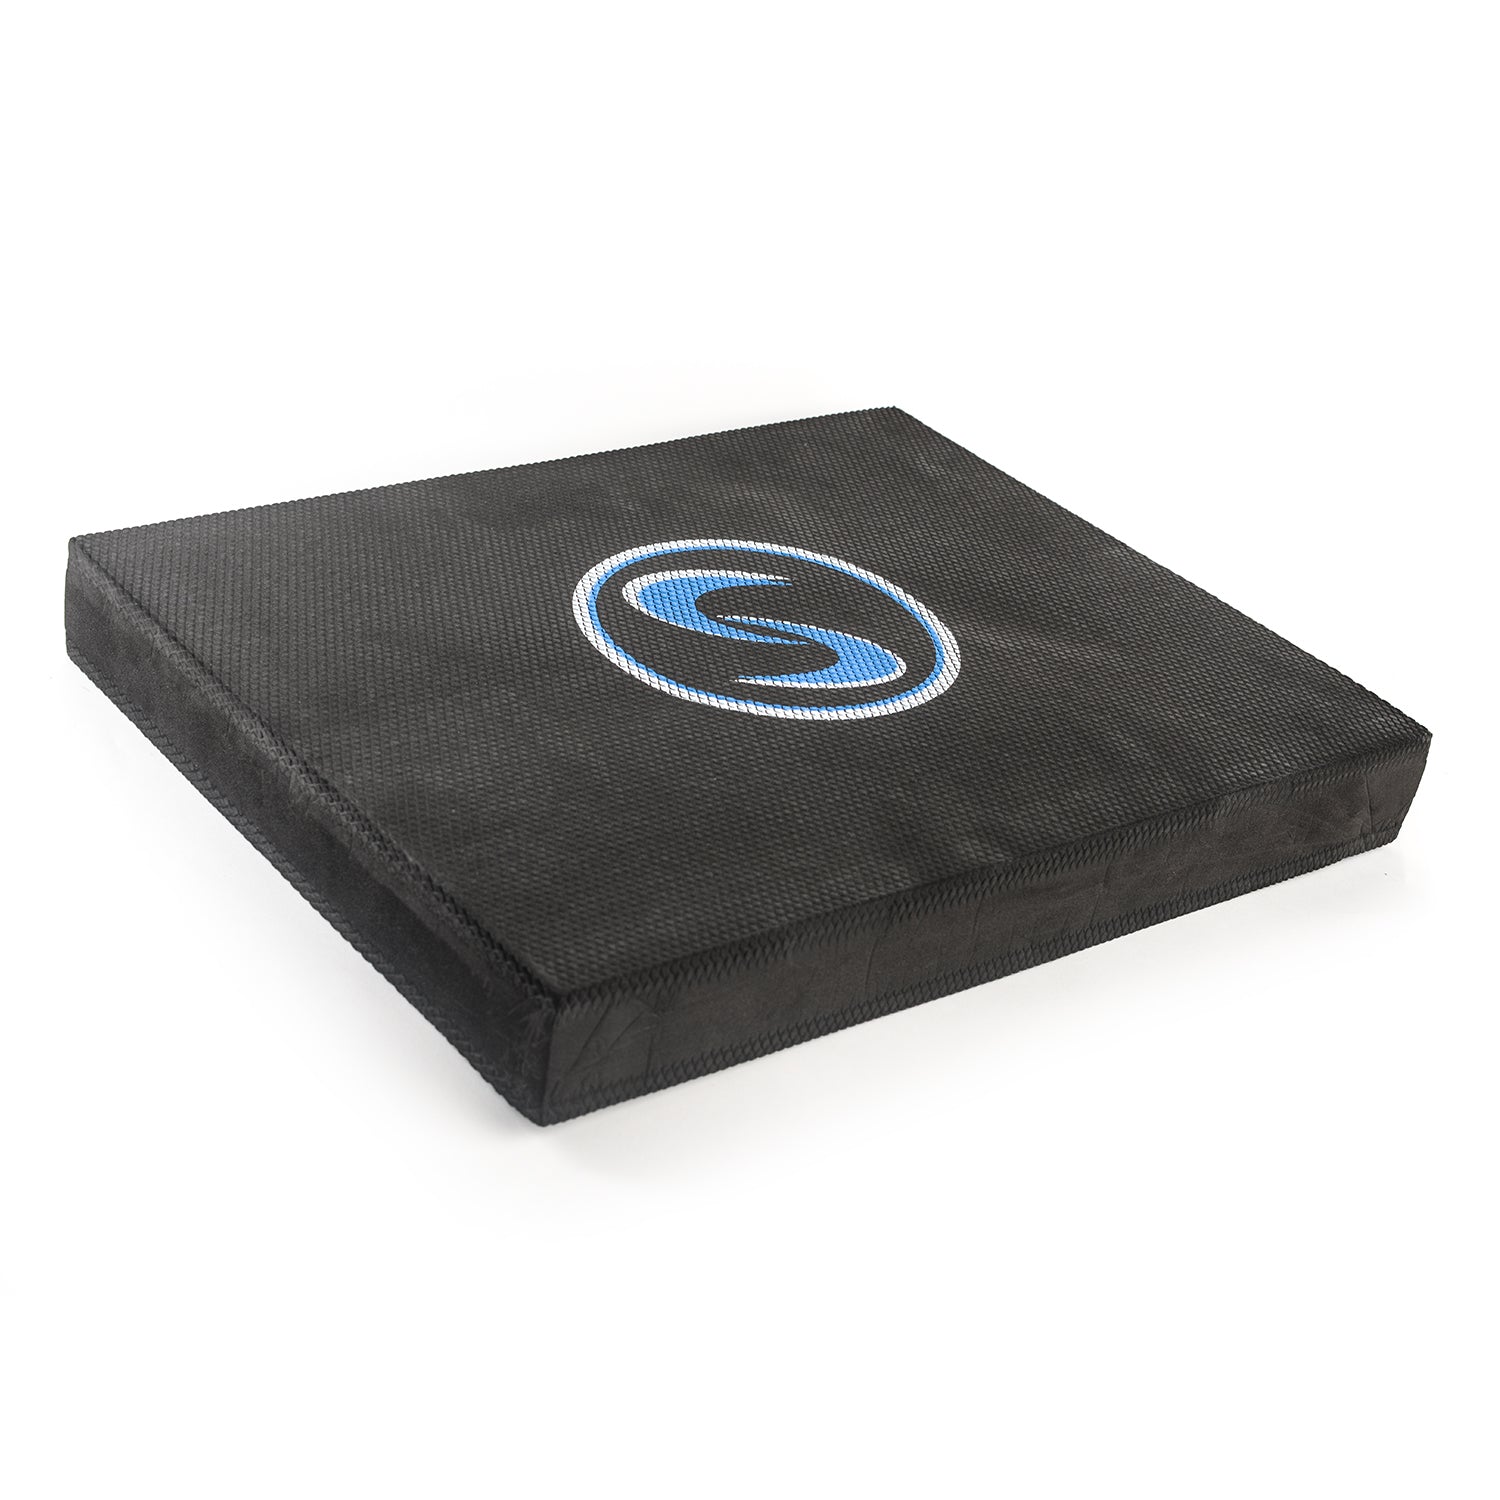 Stability Pro Pad